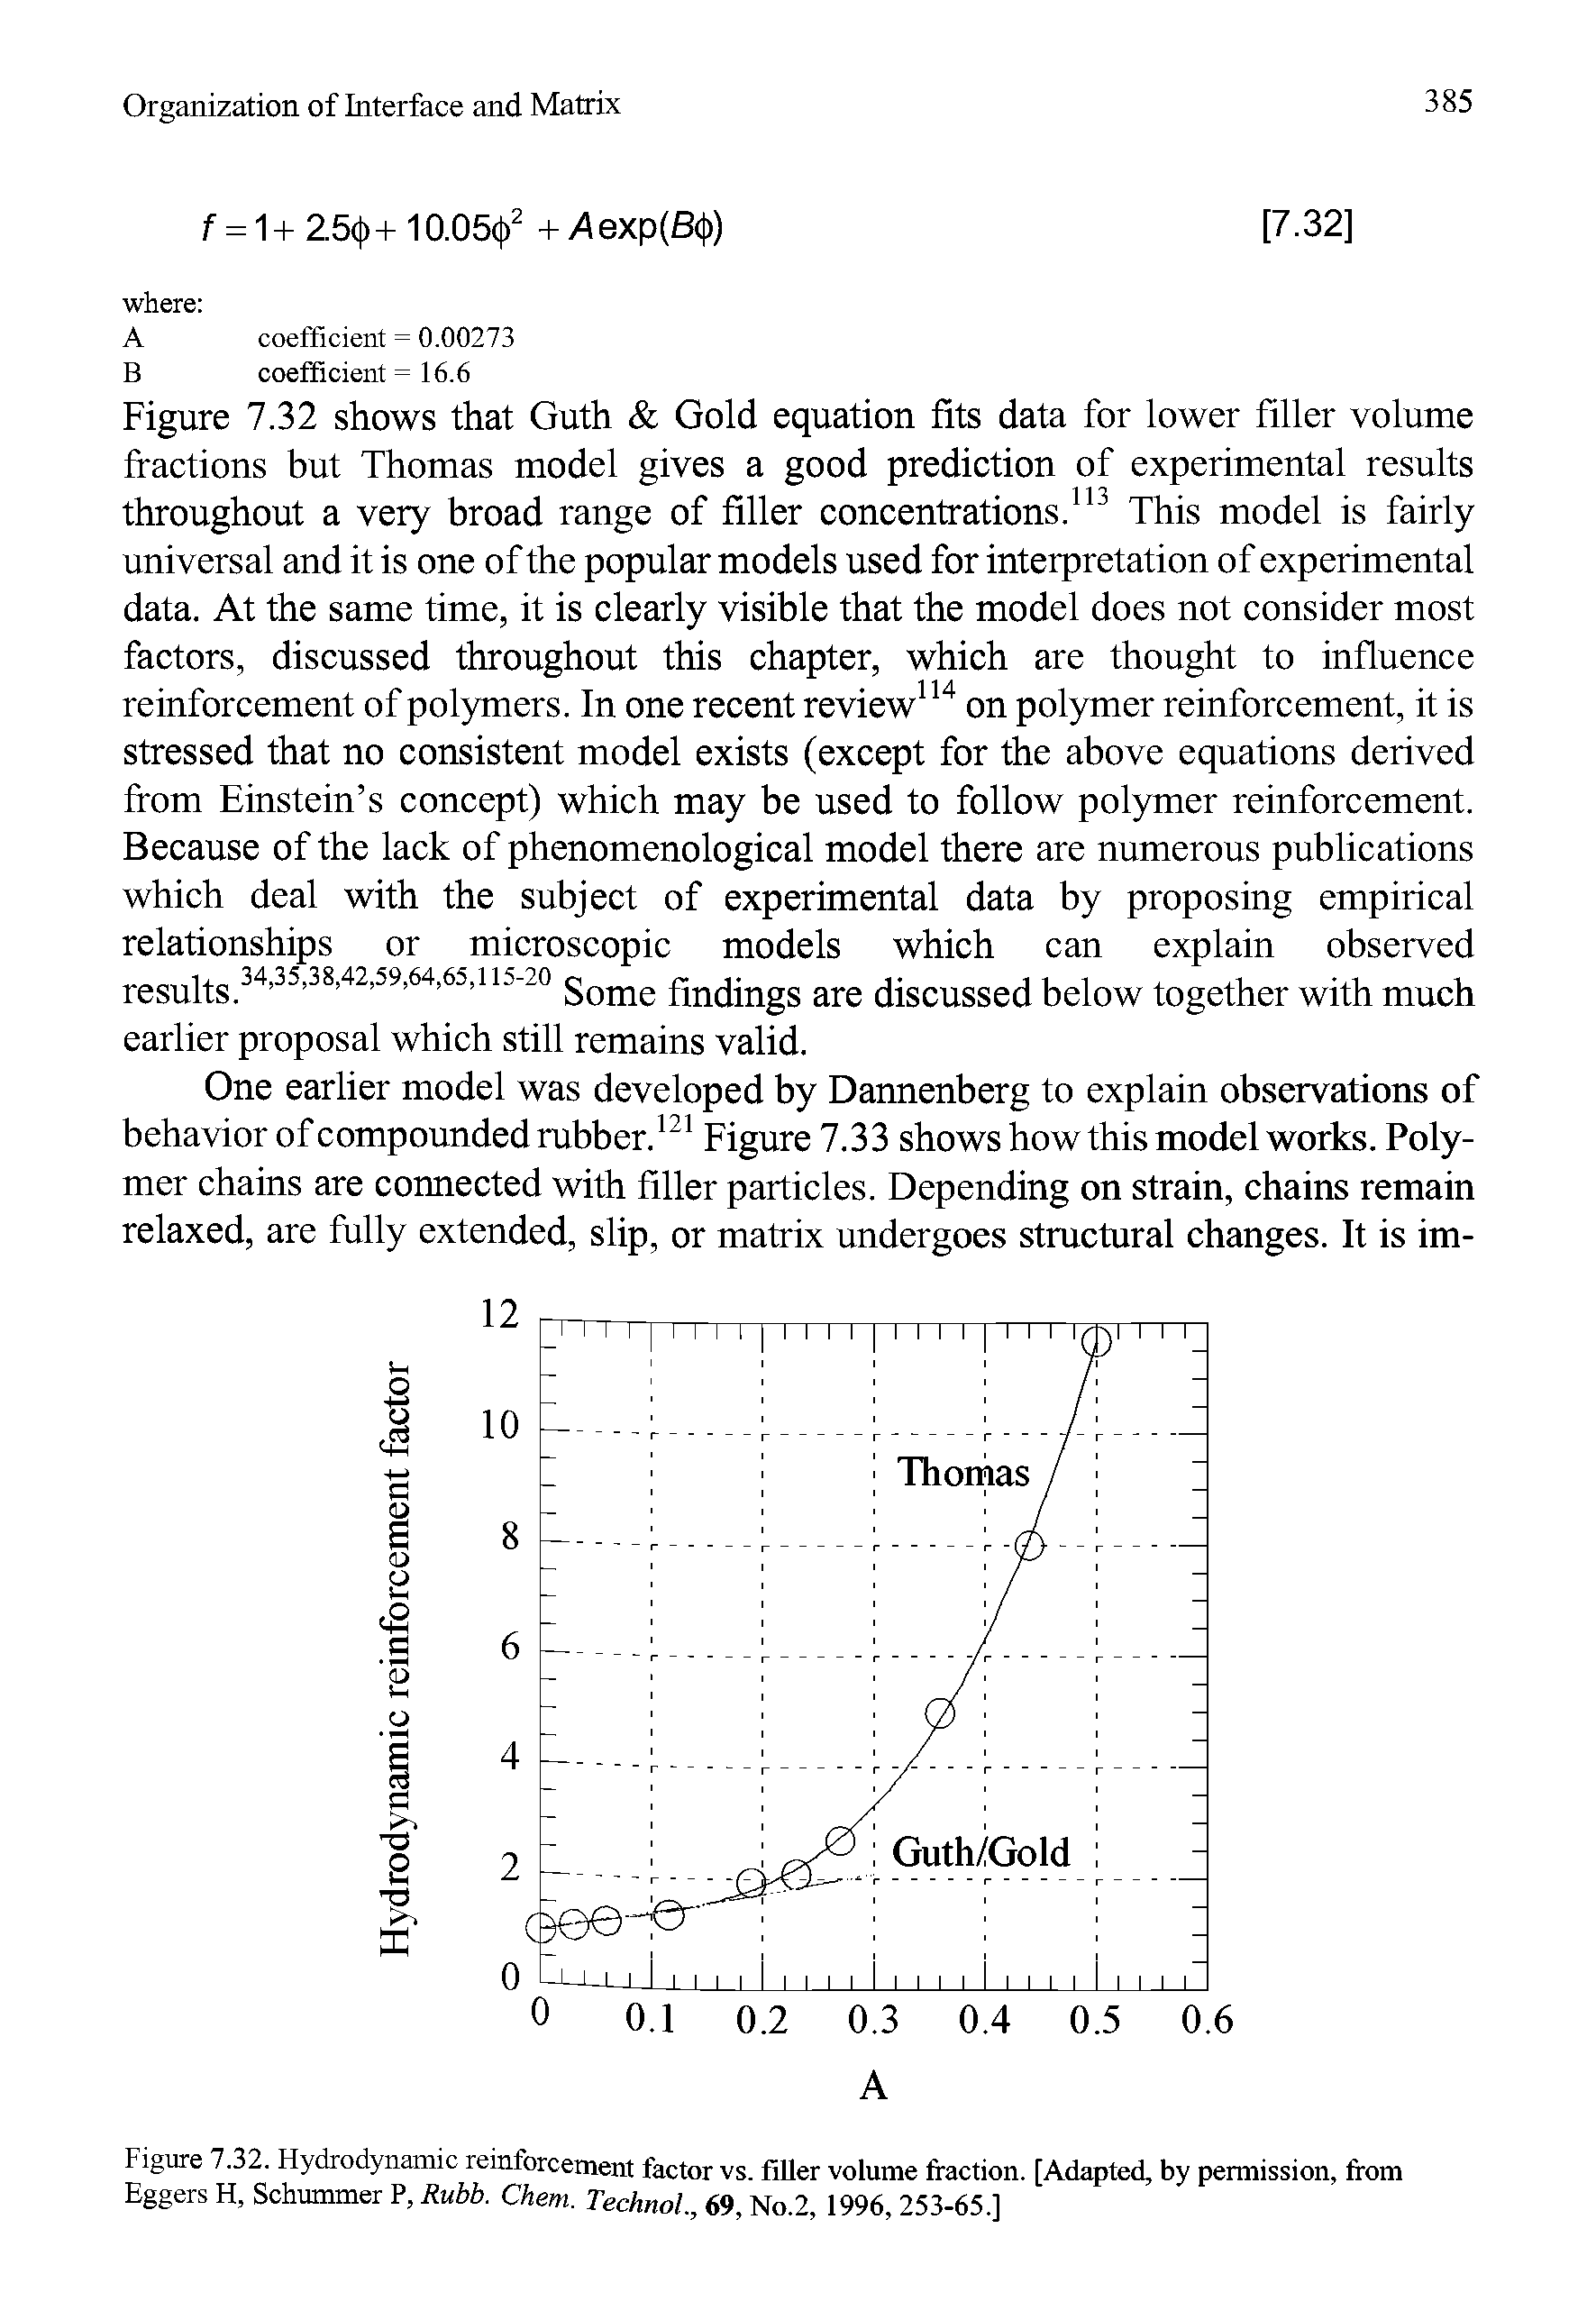 Figure 7.32. Hydrodynamic reinforcement factor vs. 111 ler volume traction. [Adapted, by permission, from Eggers H, Schummer P, Rubb. Chem. Technol., 69, No.2, 1996, 253-65.]...